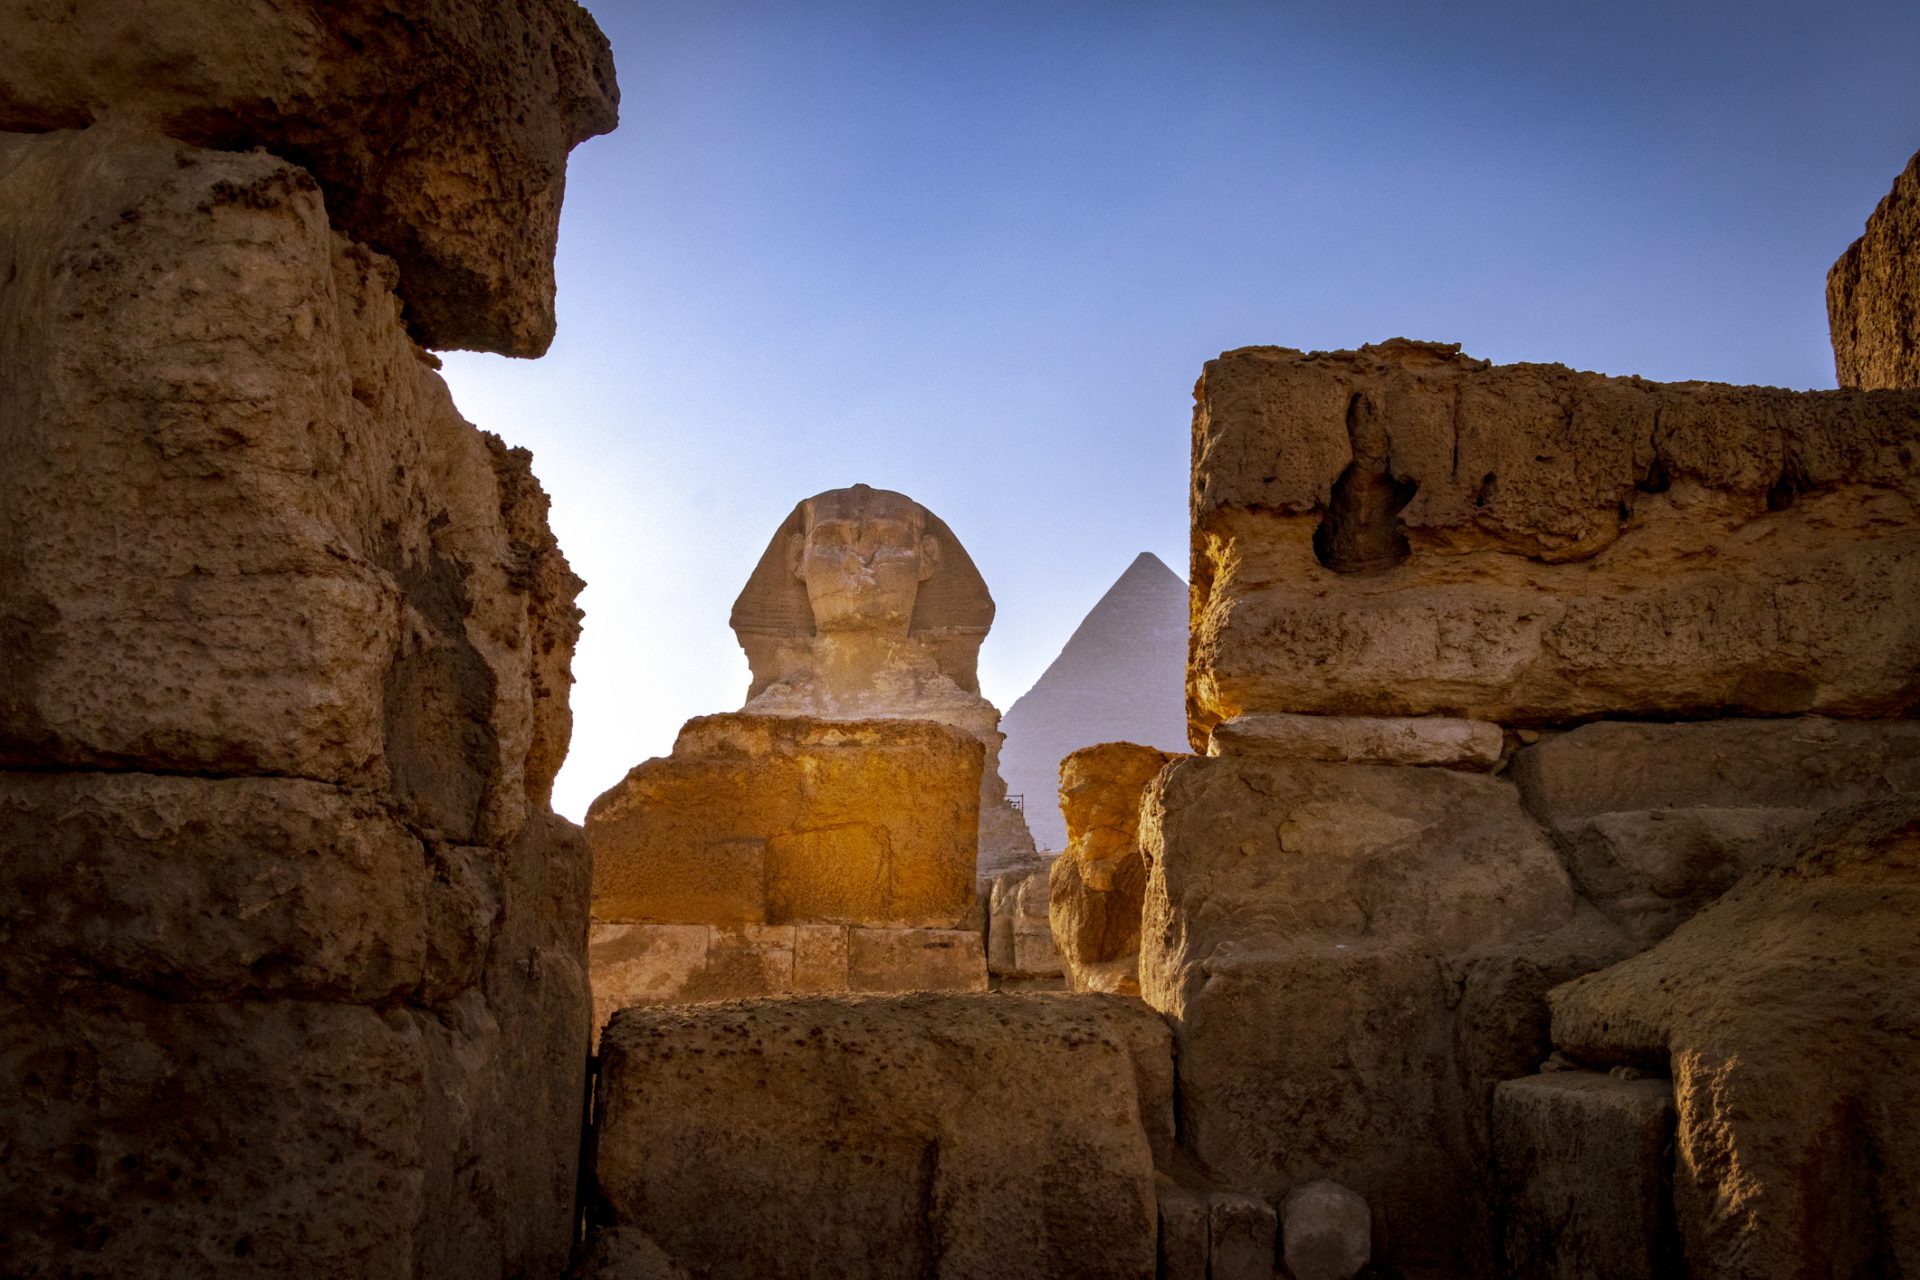 So what’s up with the Sphinx?